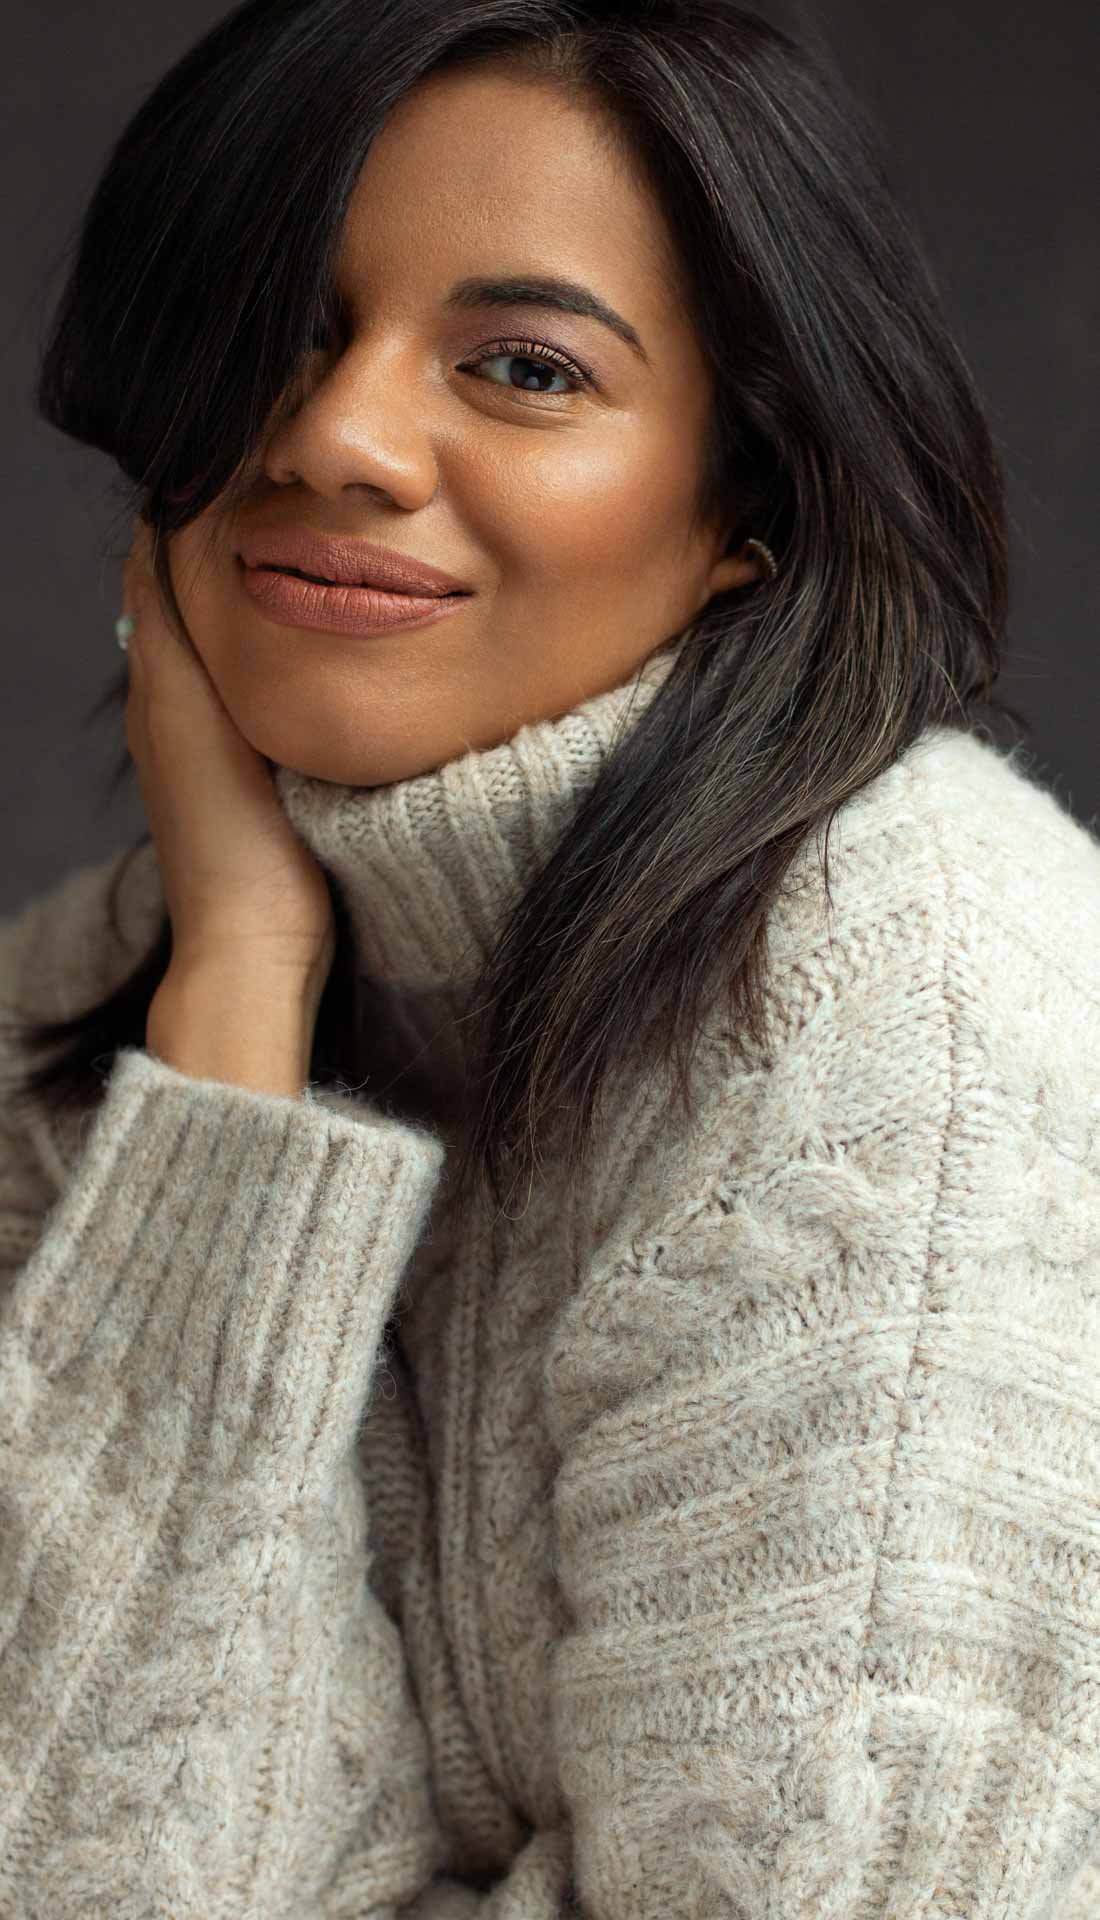 Portrait of a woman in a cozy sweater. Personal photoshoot experience in Birmingham West Midlands